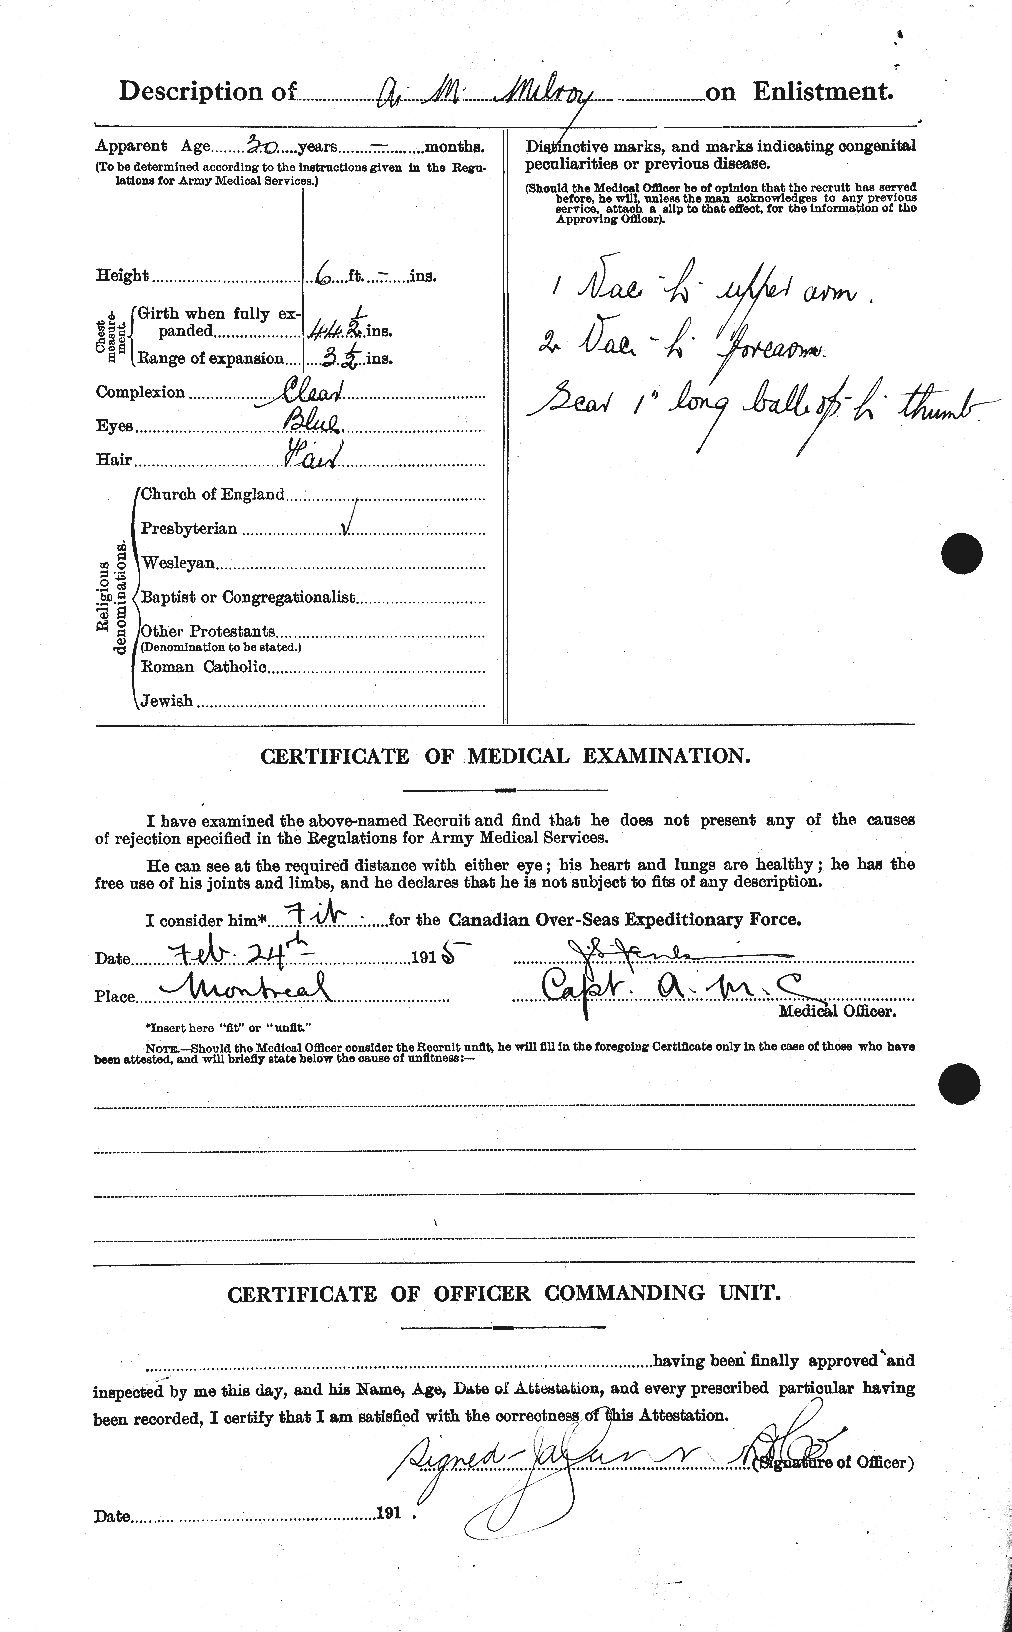 Personnel Records of the First World War - CEF 497485b